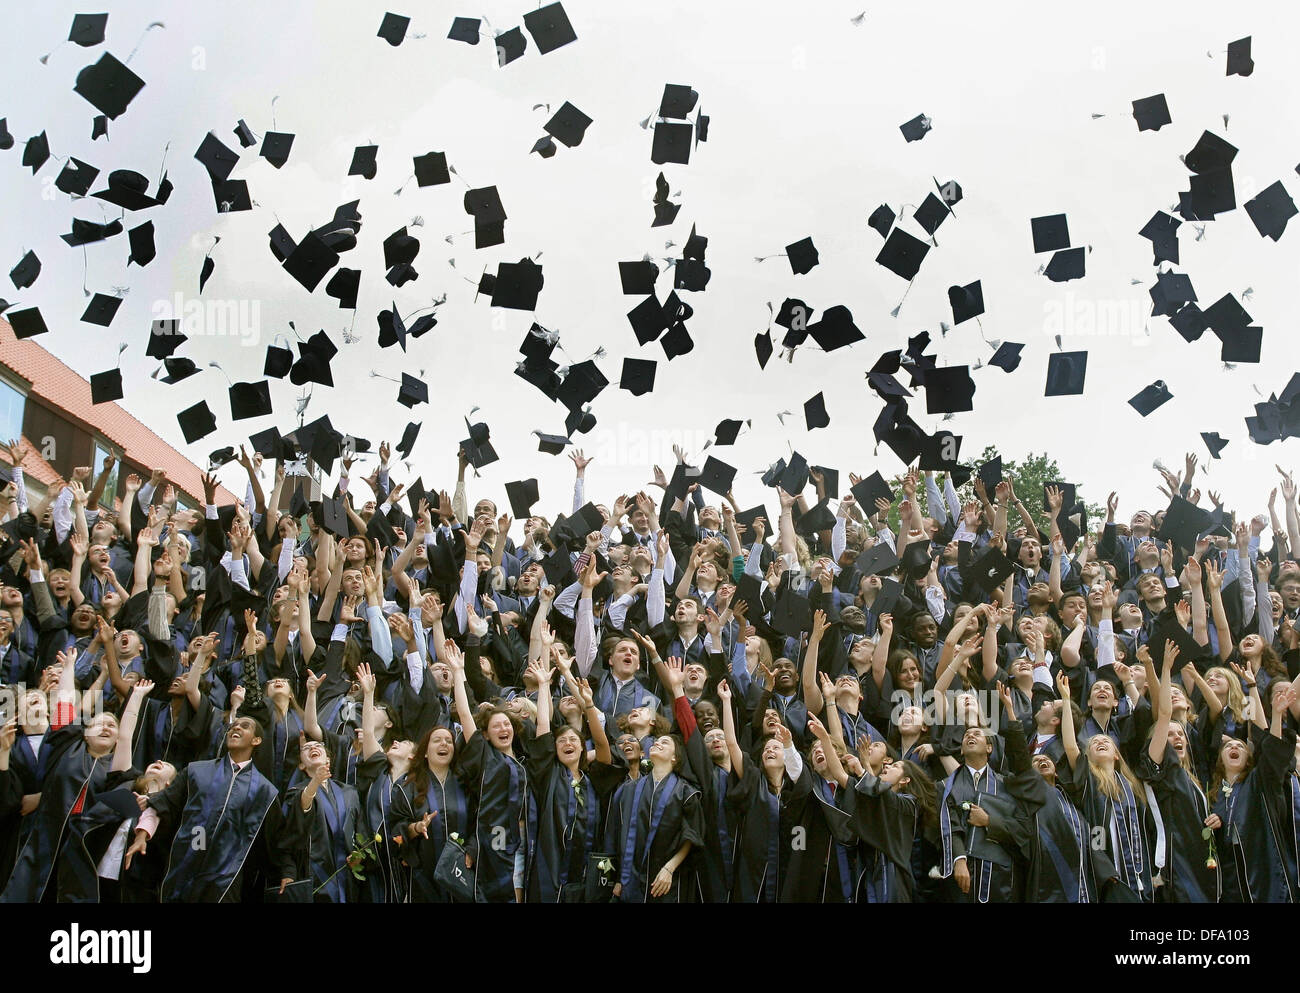 The first 333 graduates of the International University in Bremen throw up their traditional hats on the 1st of June in 2007 during their graduation celebration. Stock Photo